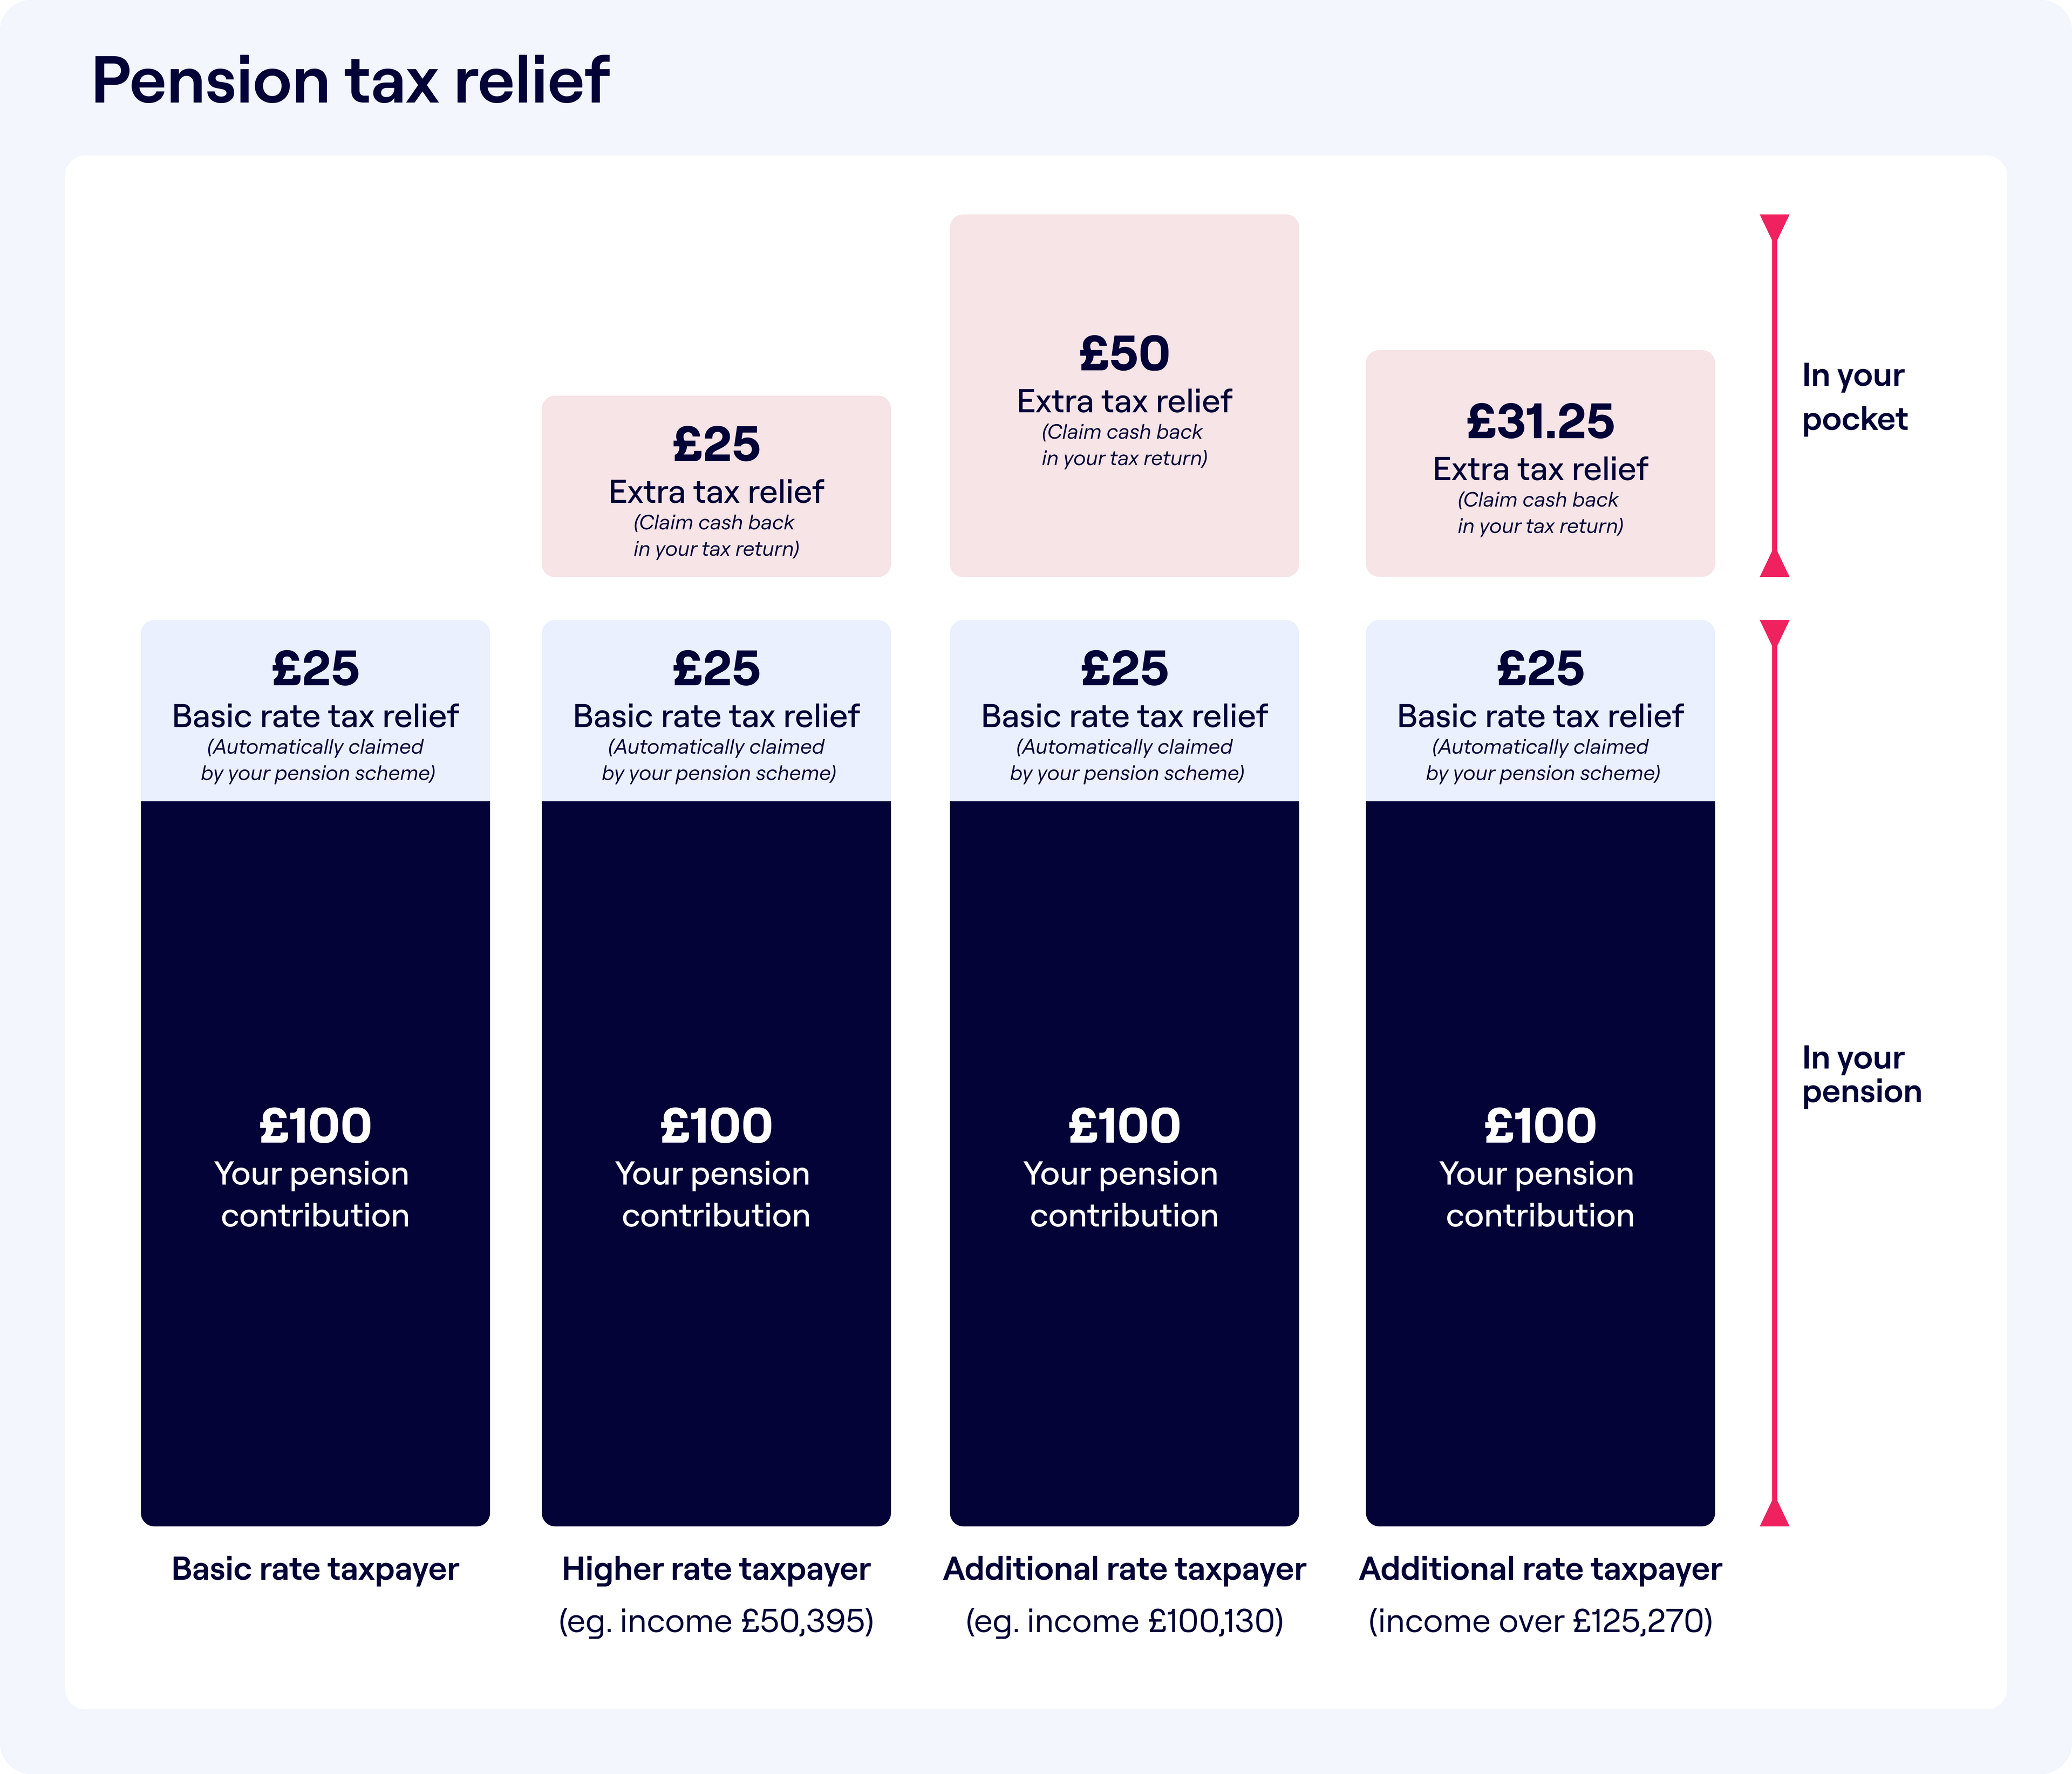 Infographic on Pension Tax Relief showing benefits for different taxpayer categories. Left to right: Basic rate taxpayer gets £25 basic rate tax relief on a £100 pension contribution, automatically claimed. Higher rate taxpayer receives an additional £25 tax relief to claim on tax return. Additional rate taxpayer gets £25 relief automatically and £31.25 extra to claim.